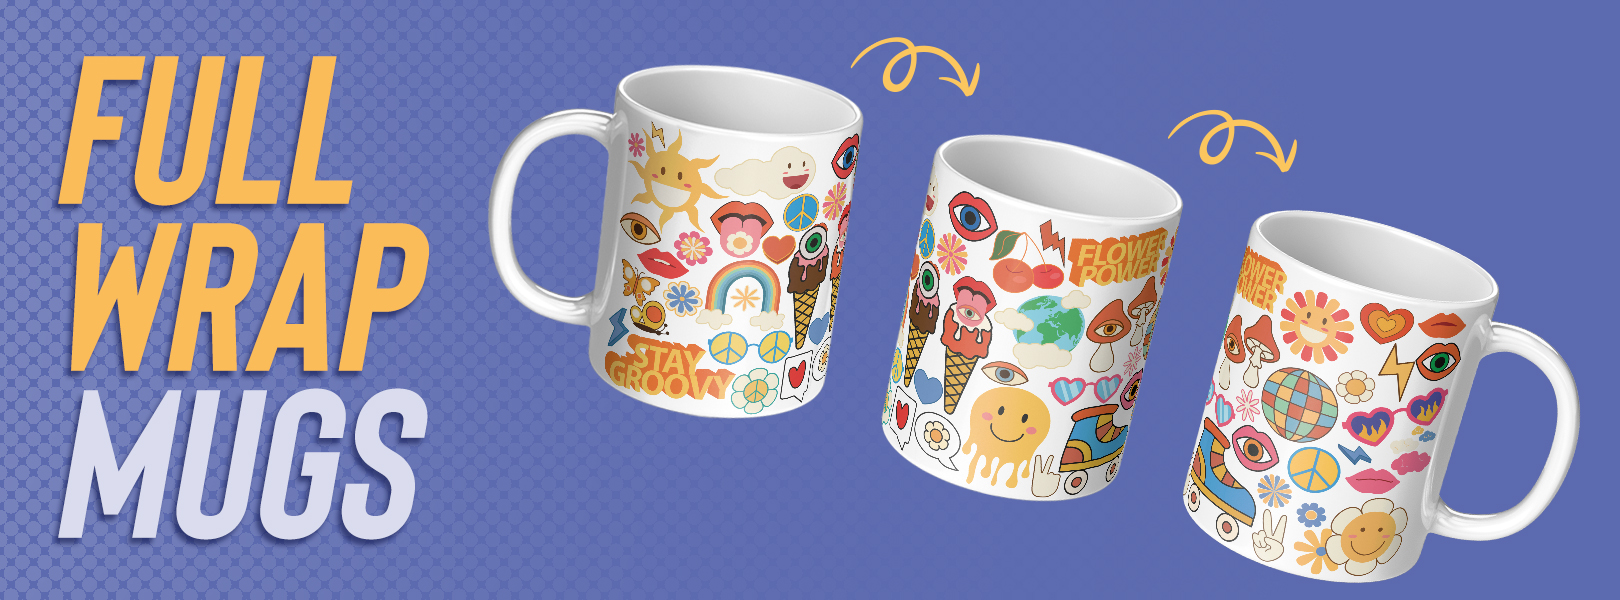 Unleash Your Creativity: Full Wrap Mugs Are Here!